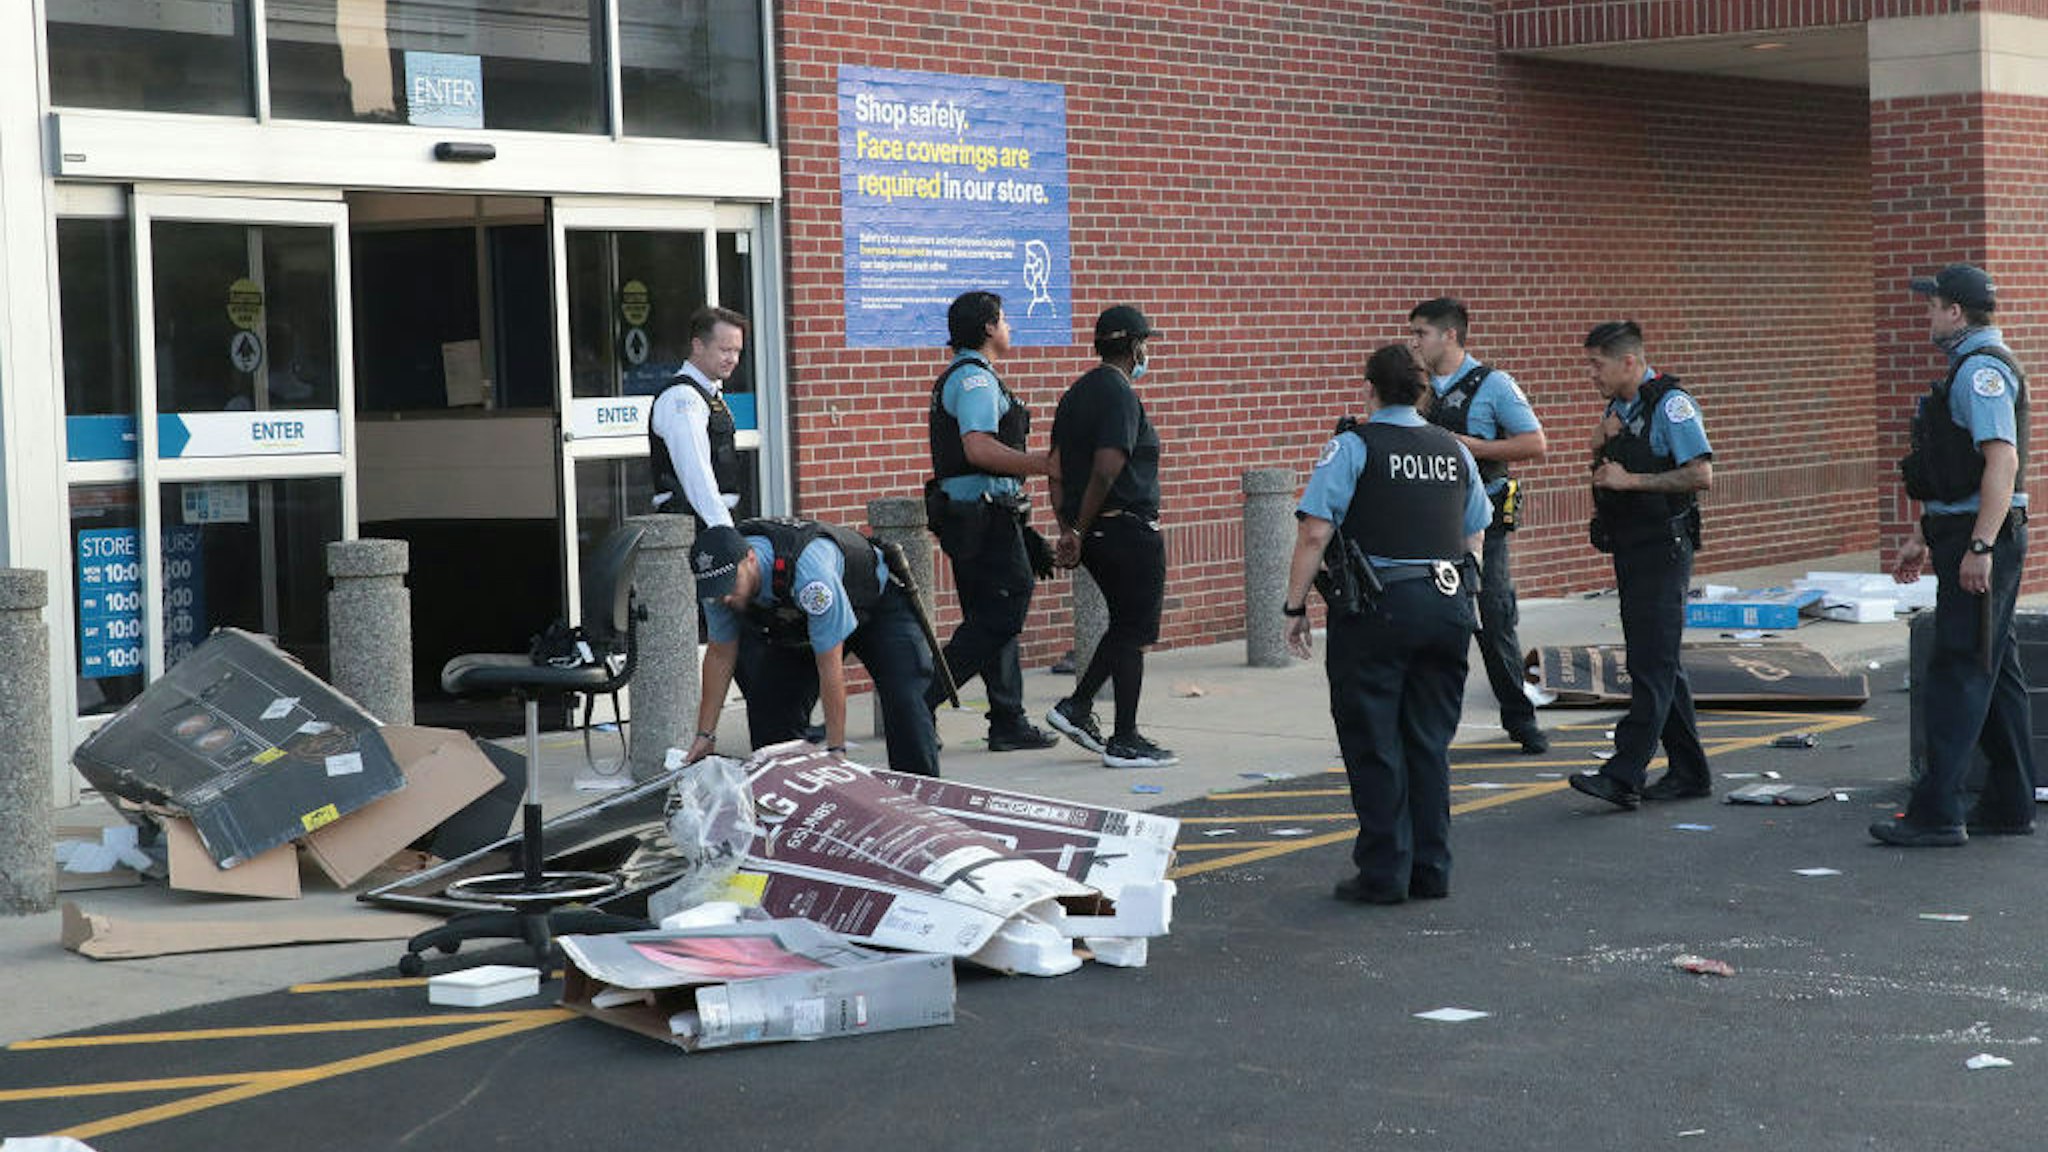 CHICAGO, ILLINOIS - AUGUST 10: Police officers detain a man who was found inside of a Best Buy store after parts of the city had widespread looting and vandalism, on August 10, 2020 in Chicago, Illinois. Police made several arrests during the night of unrest and recovered at least one firearm. (Photo by Scott Olson/Getty Images)